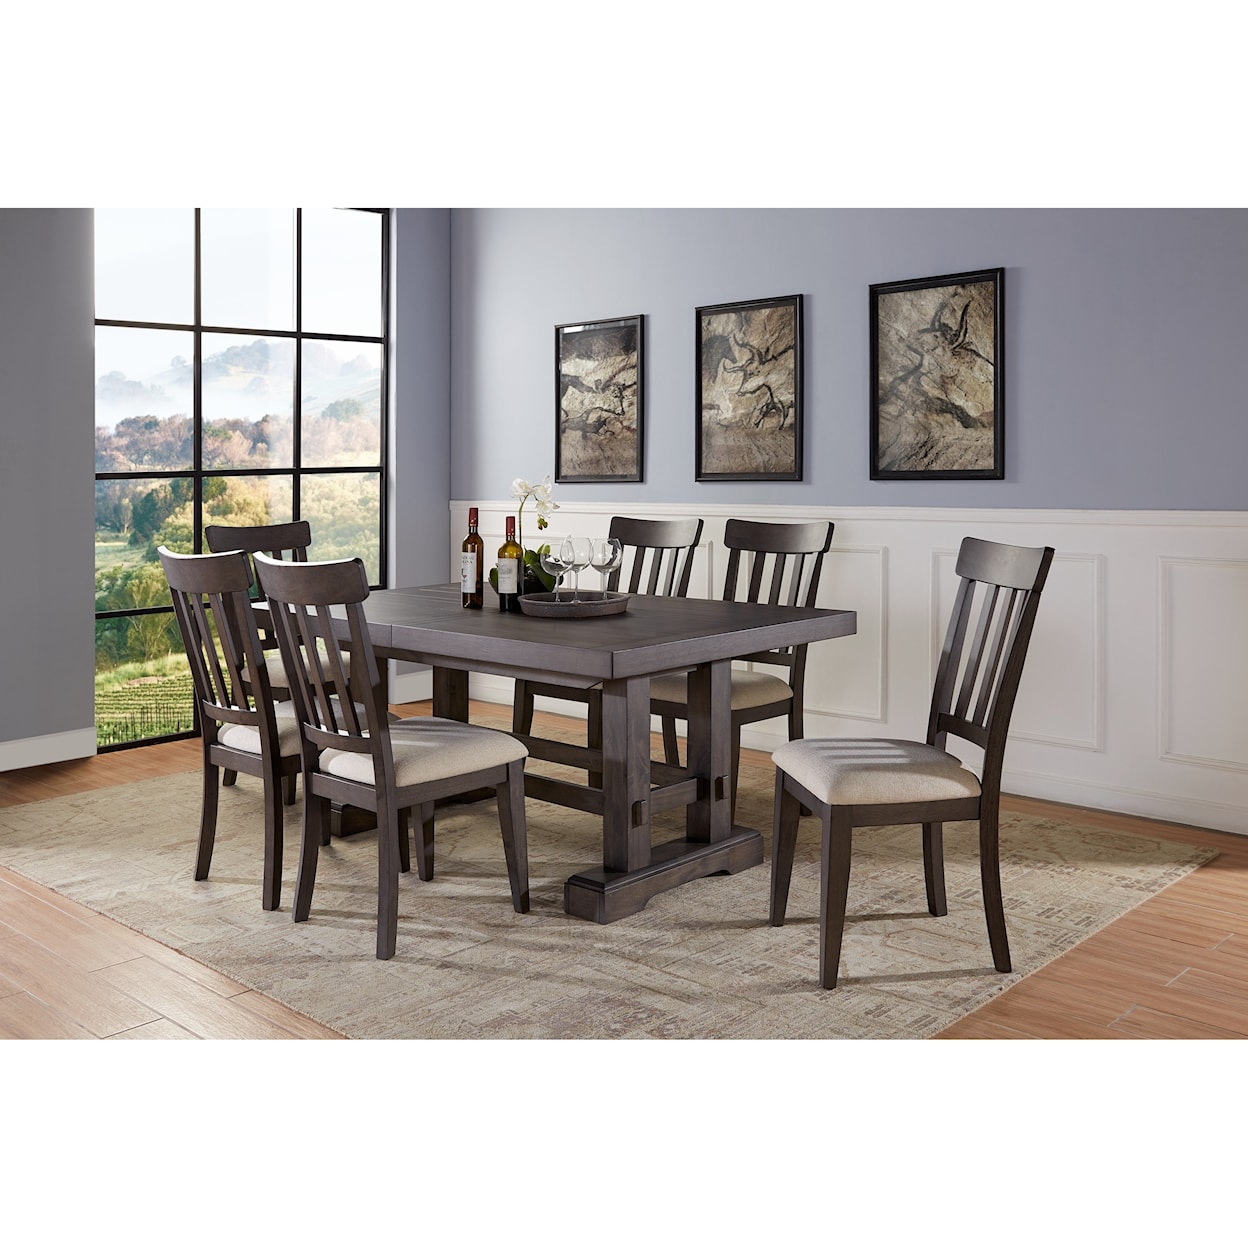 Prime Napa 7-Piece Table and Chair Set 